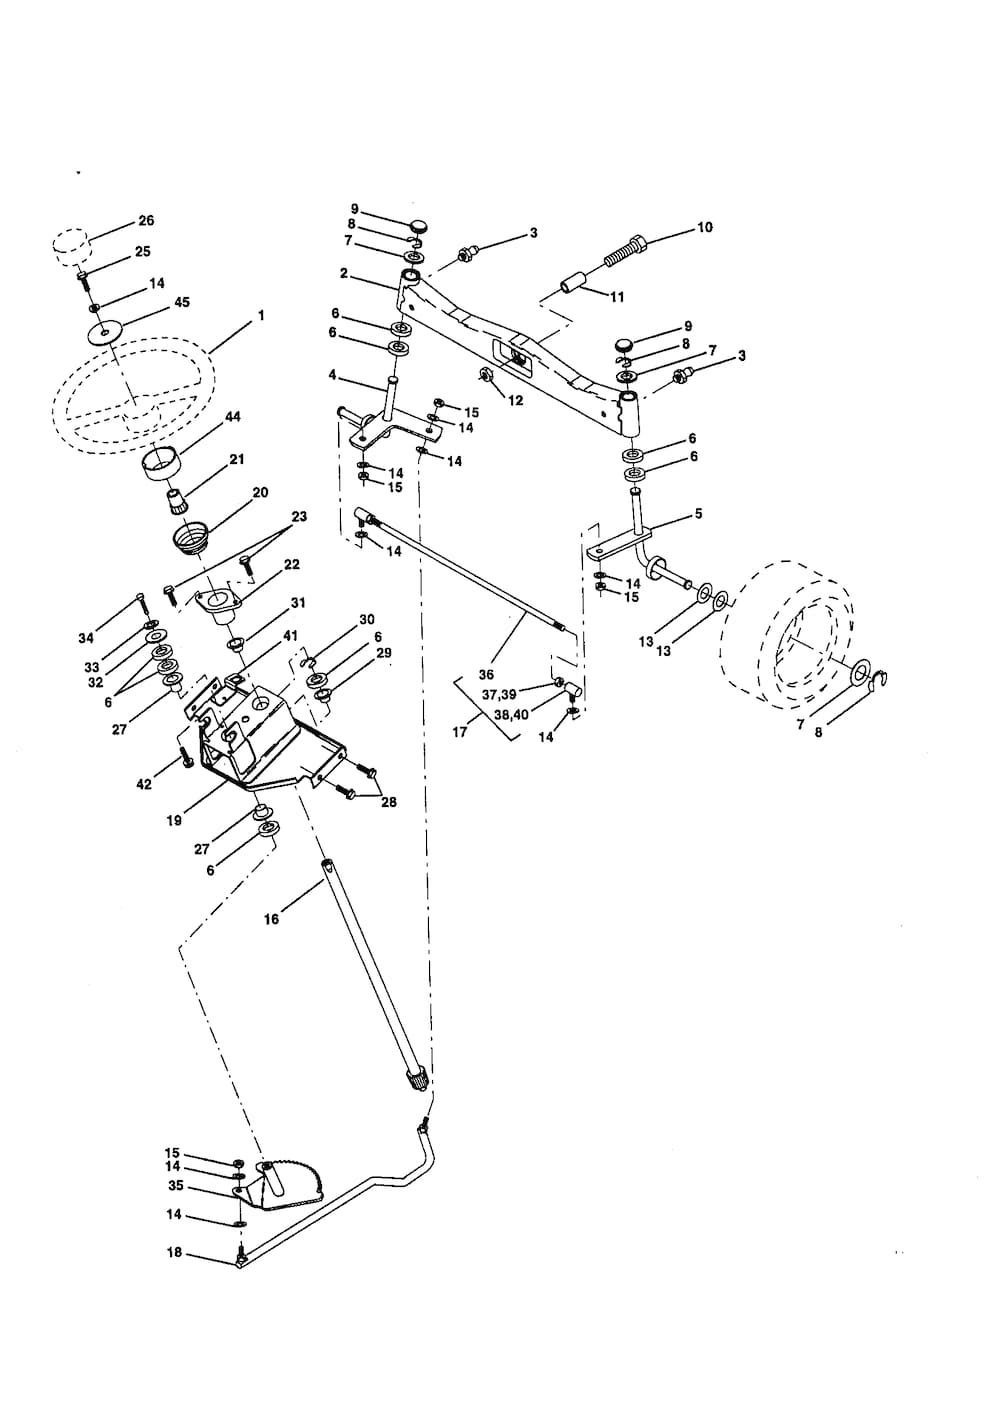 STEERING ASSEMBLY Diagram and Parts List for CRAFTSMAN Riding-Mower ...